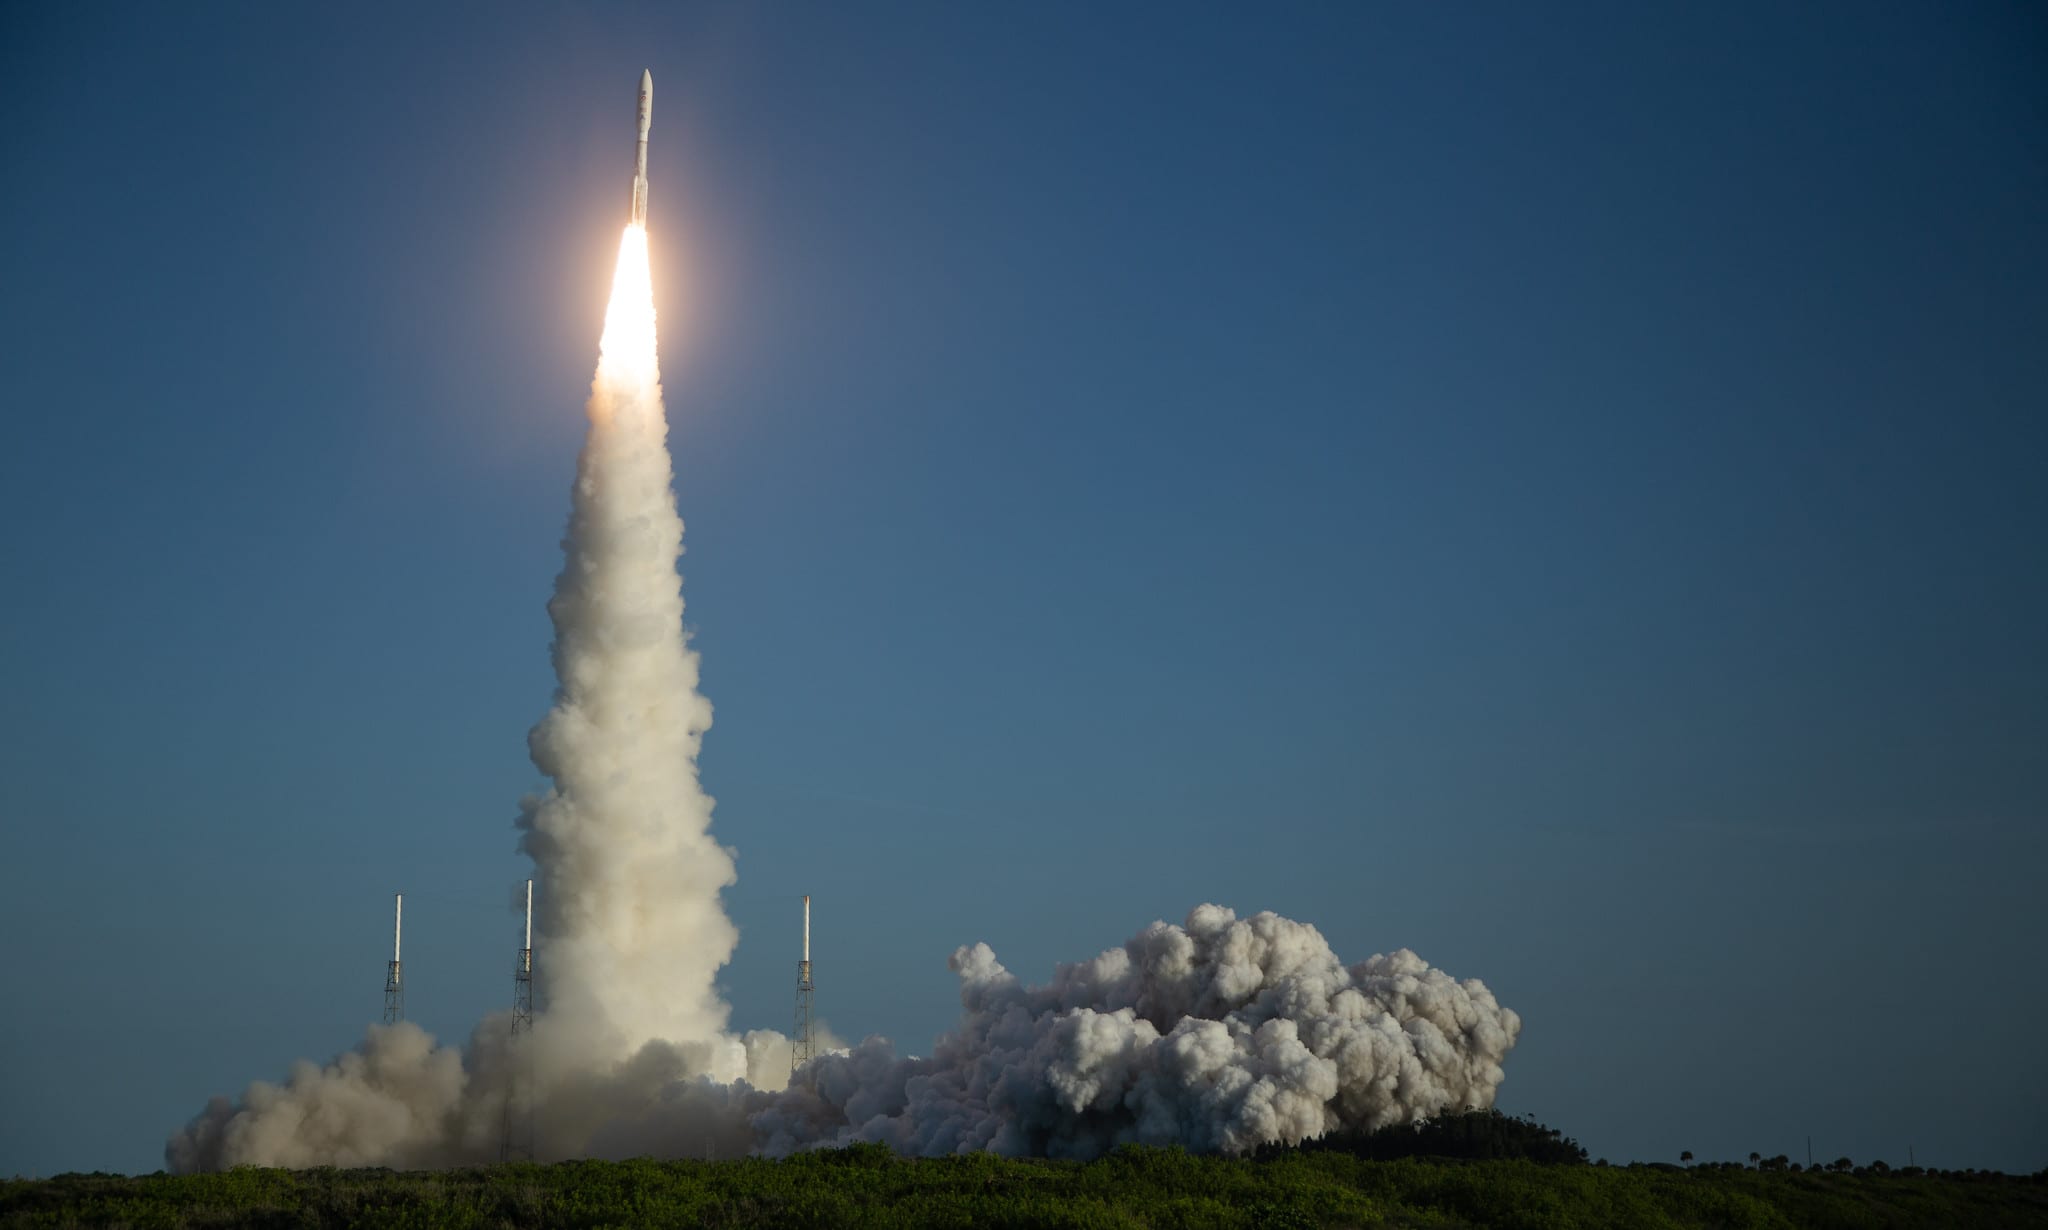 United Launch Alliance Atlas V rocket with NASA’s Mars 2020 Perseverance rover onboard launches from Cape Canaveral